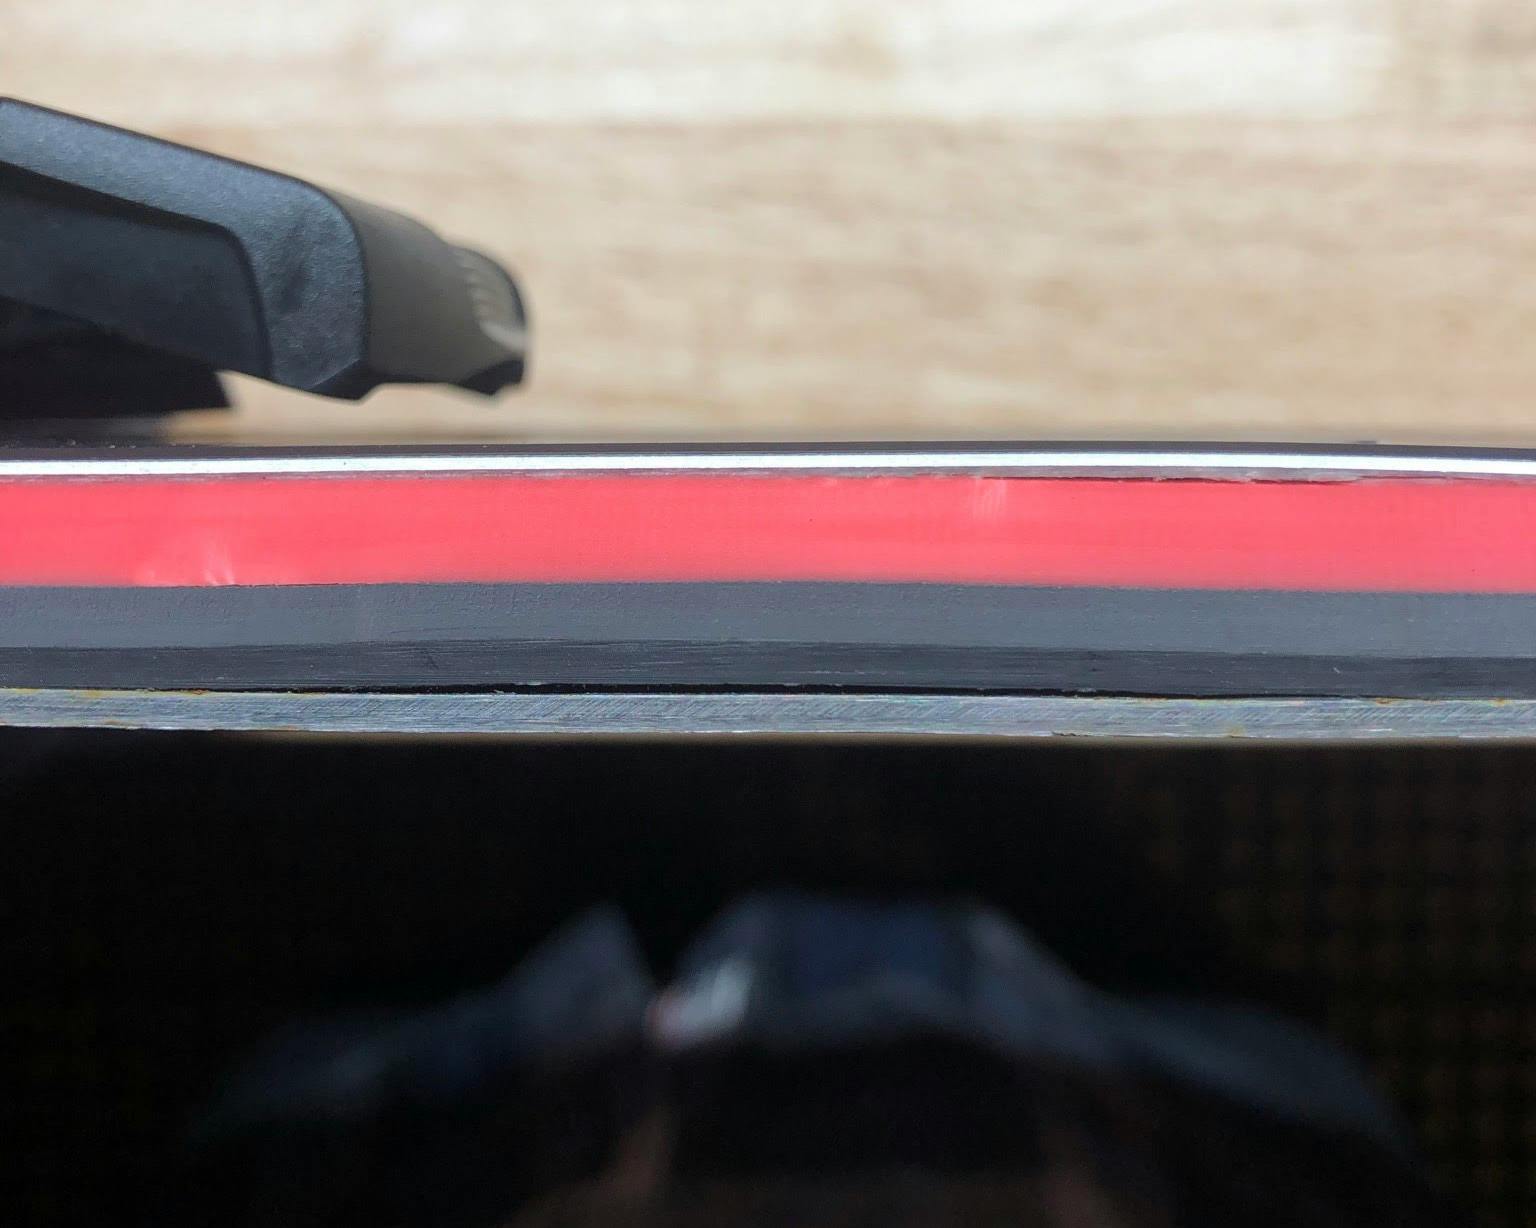 Close up photo of the edge of the skis, showing the delamination that has occured.